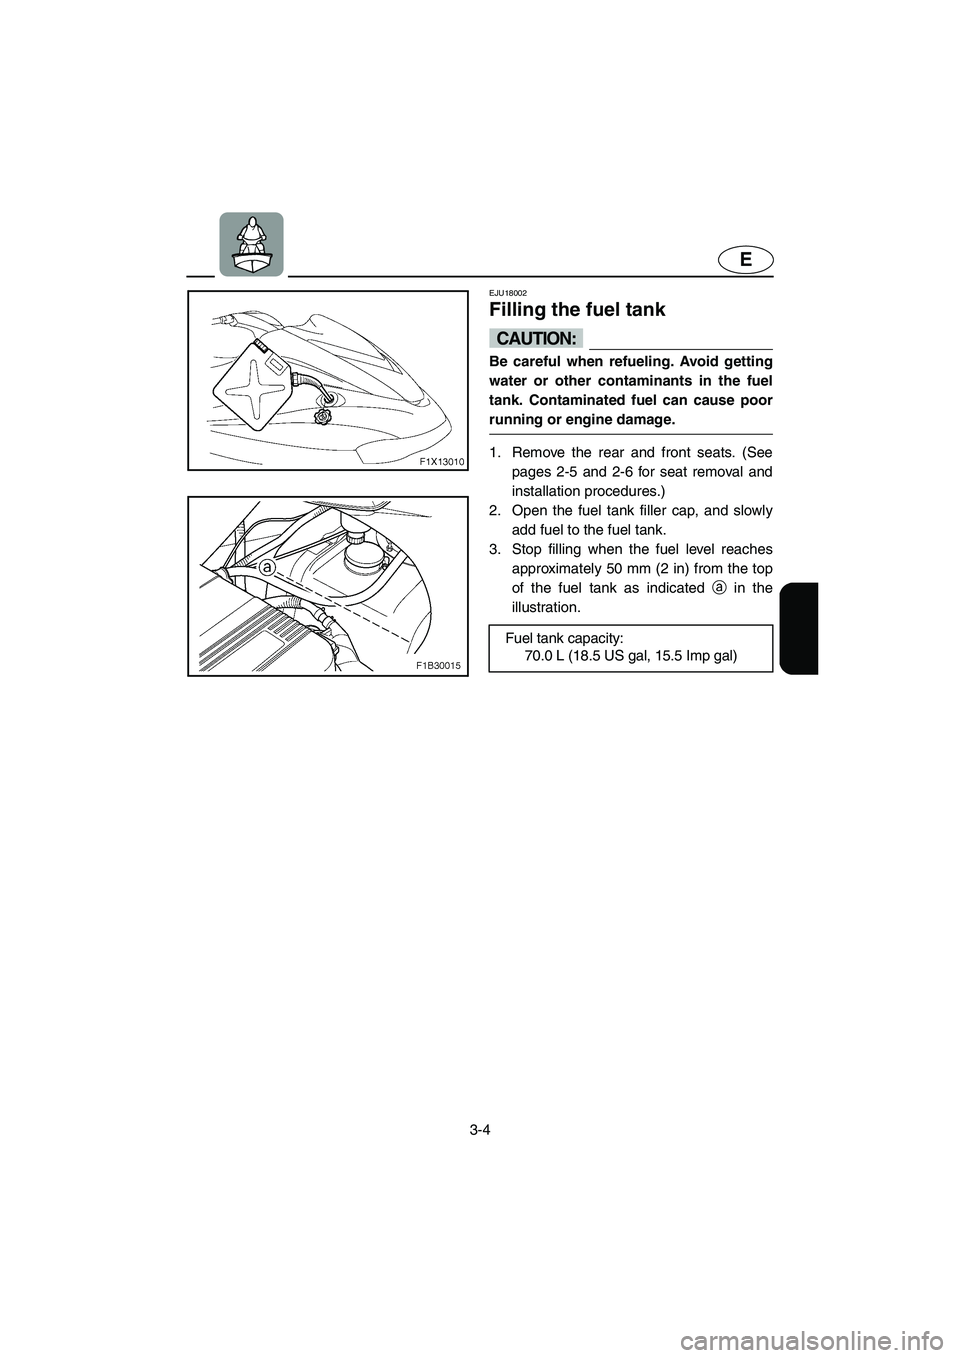 YAMAHA FX CRUISER 2006 Repair Manual 3-4
E
EJU18002
Filling the fuel tank 
CAUTION:@ Be careful when refueling. Avoid getting
water or other contaminants in the fuel
tank. Contaminated fuel can cause poor
running or engine damage. 
@
1. 